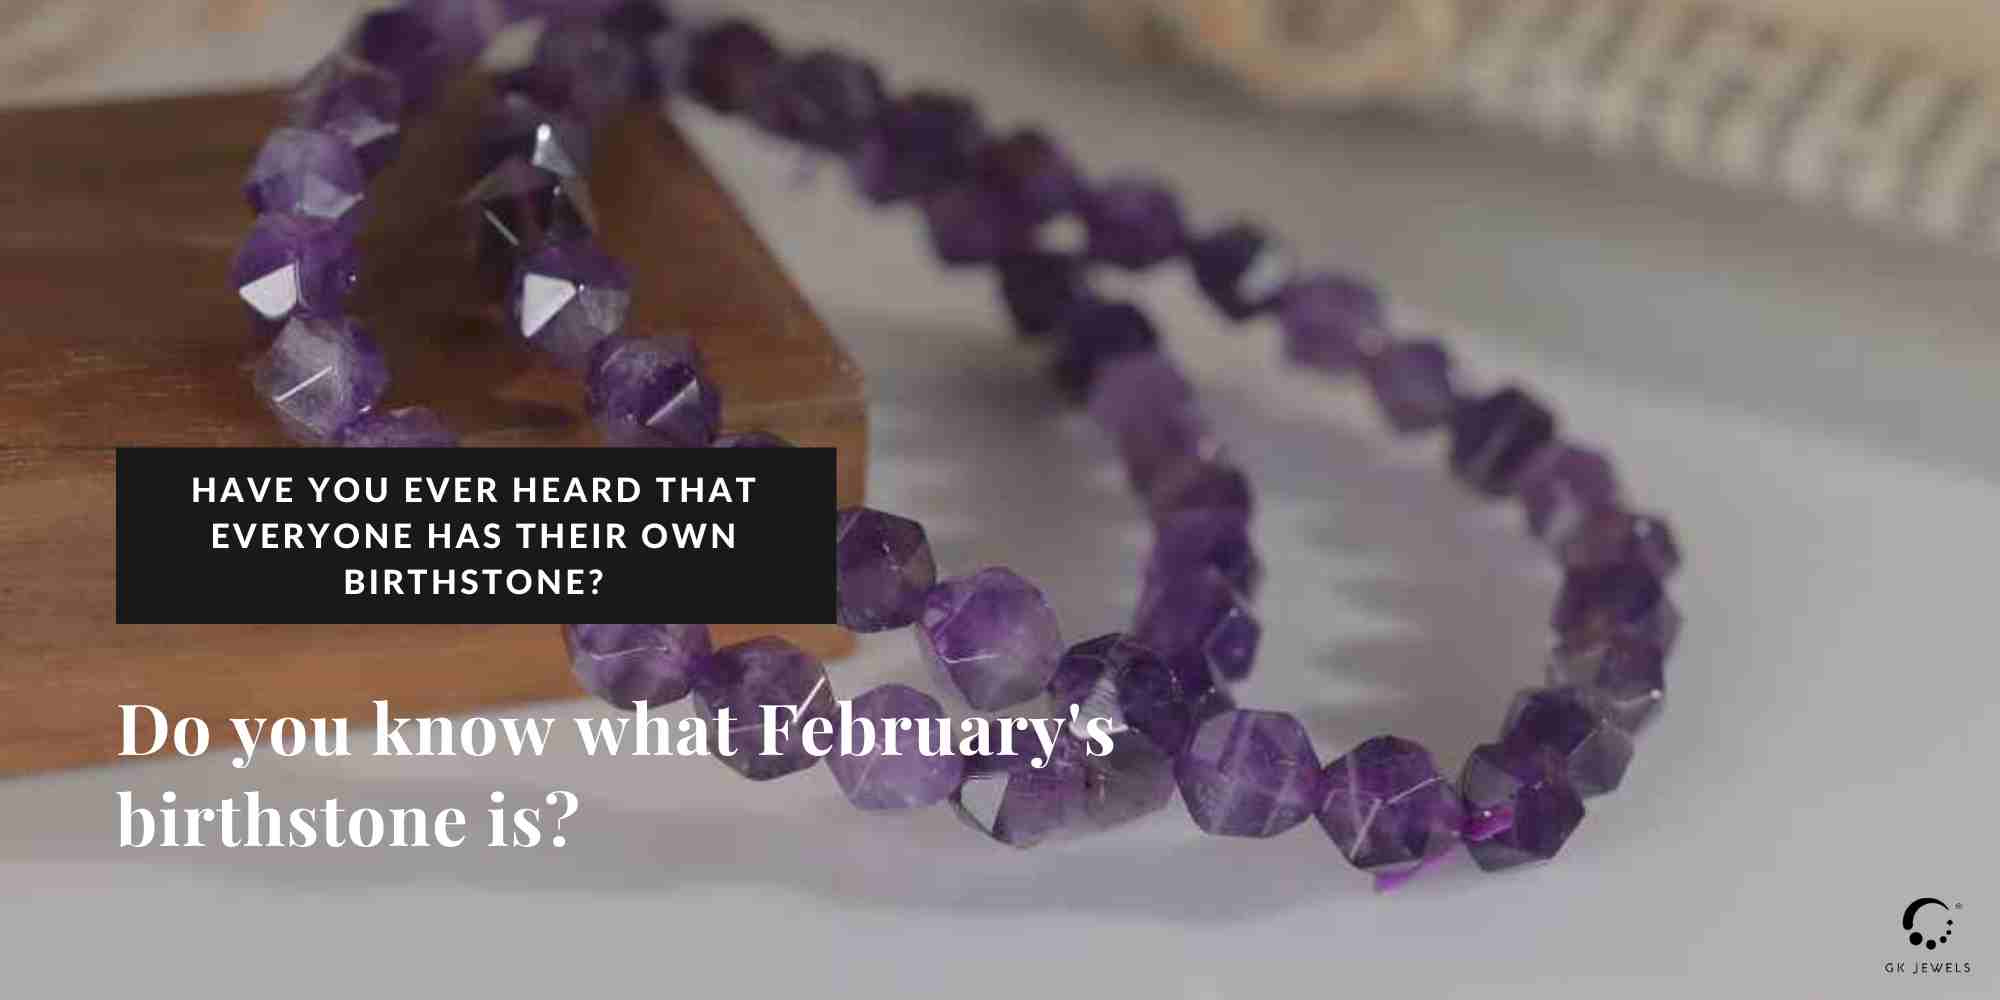 Have you ever heard that everyone has their own birthstone? And do you know what February’s birthstone is?